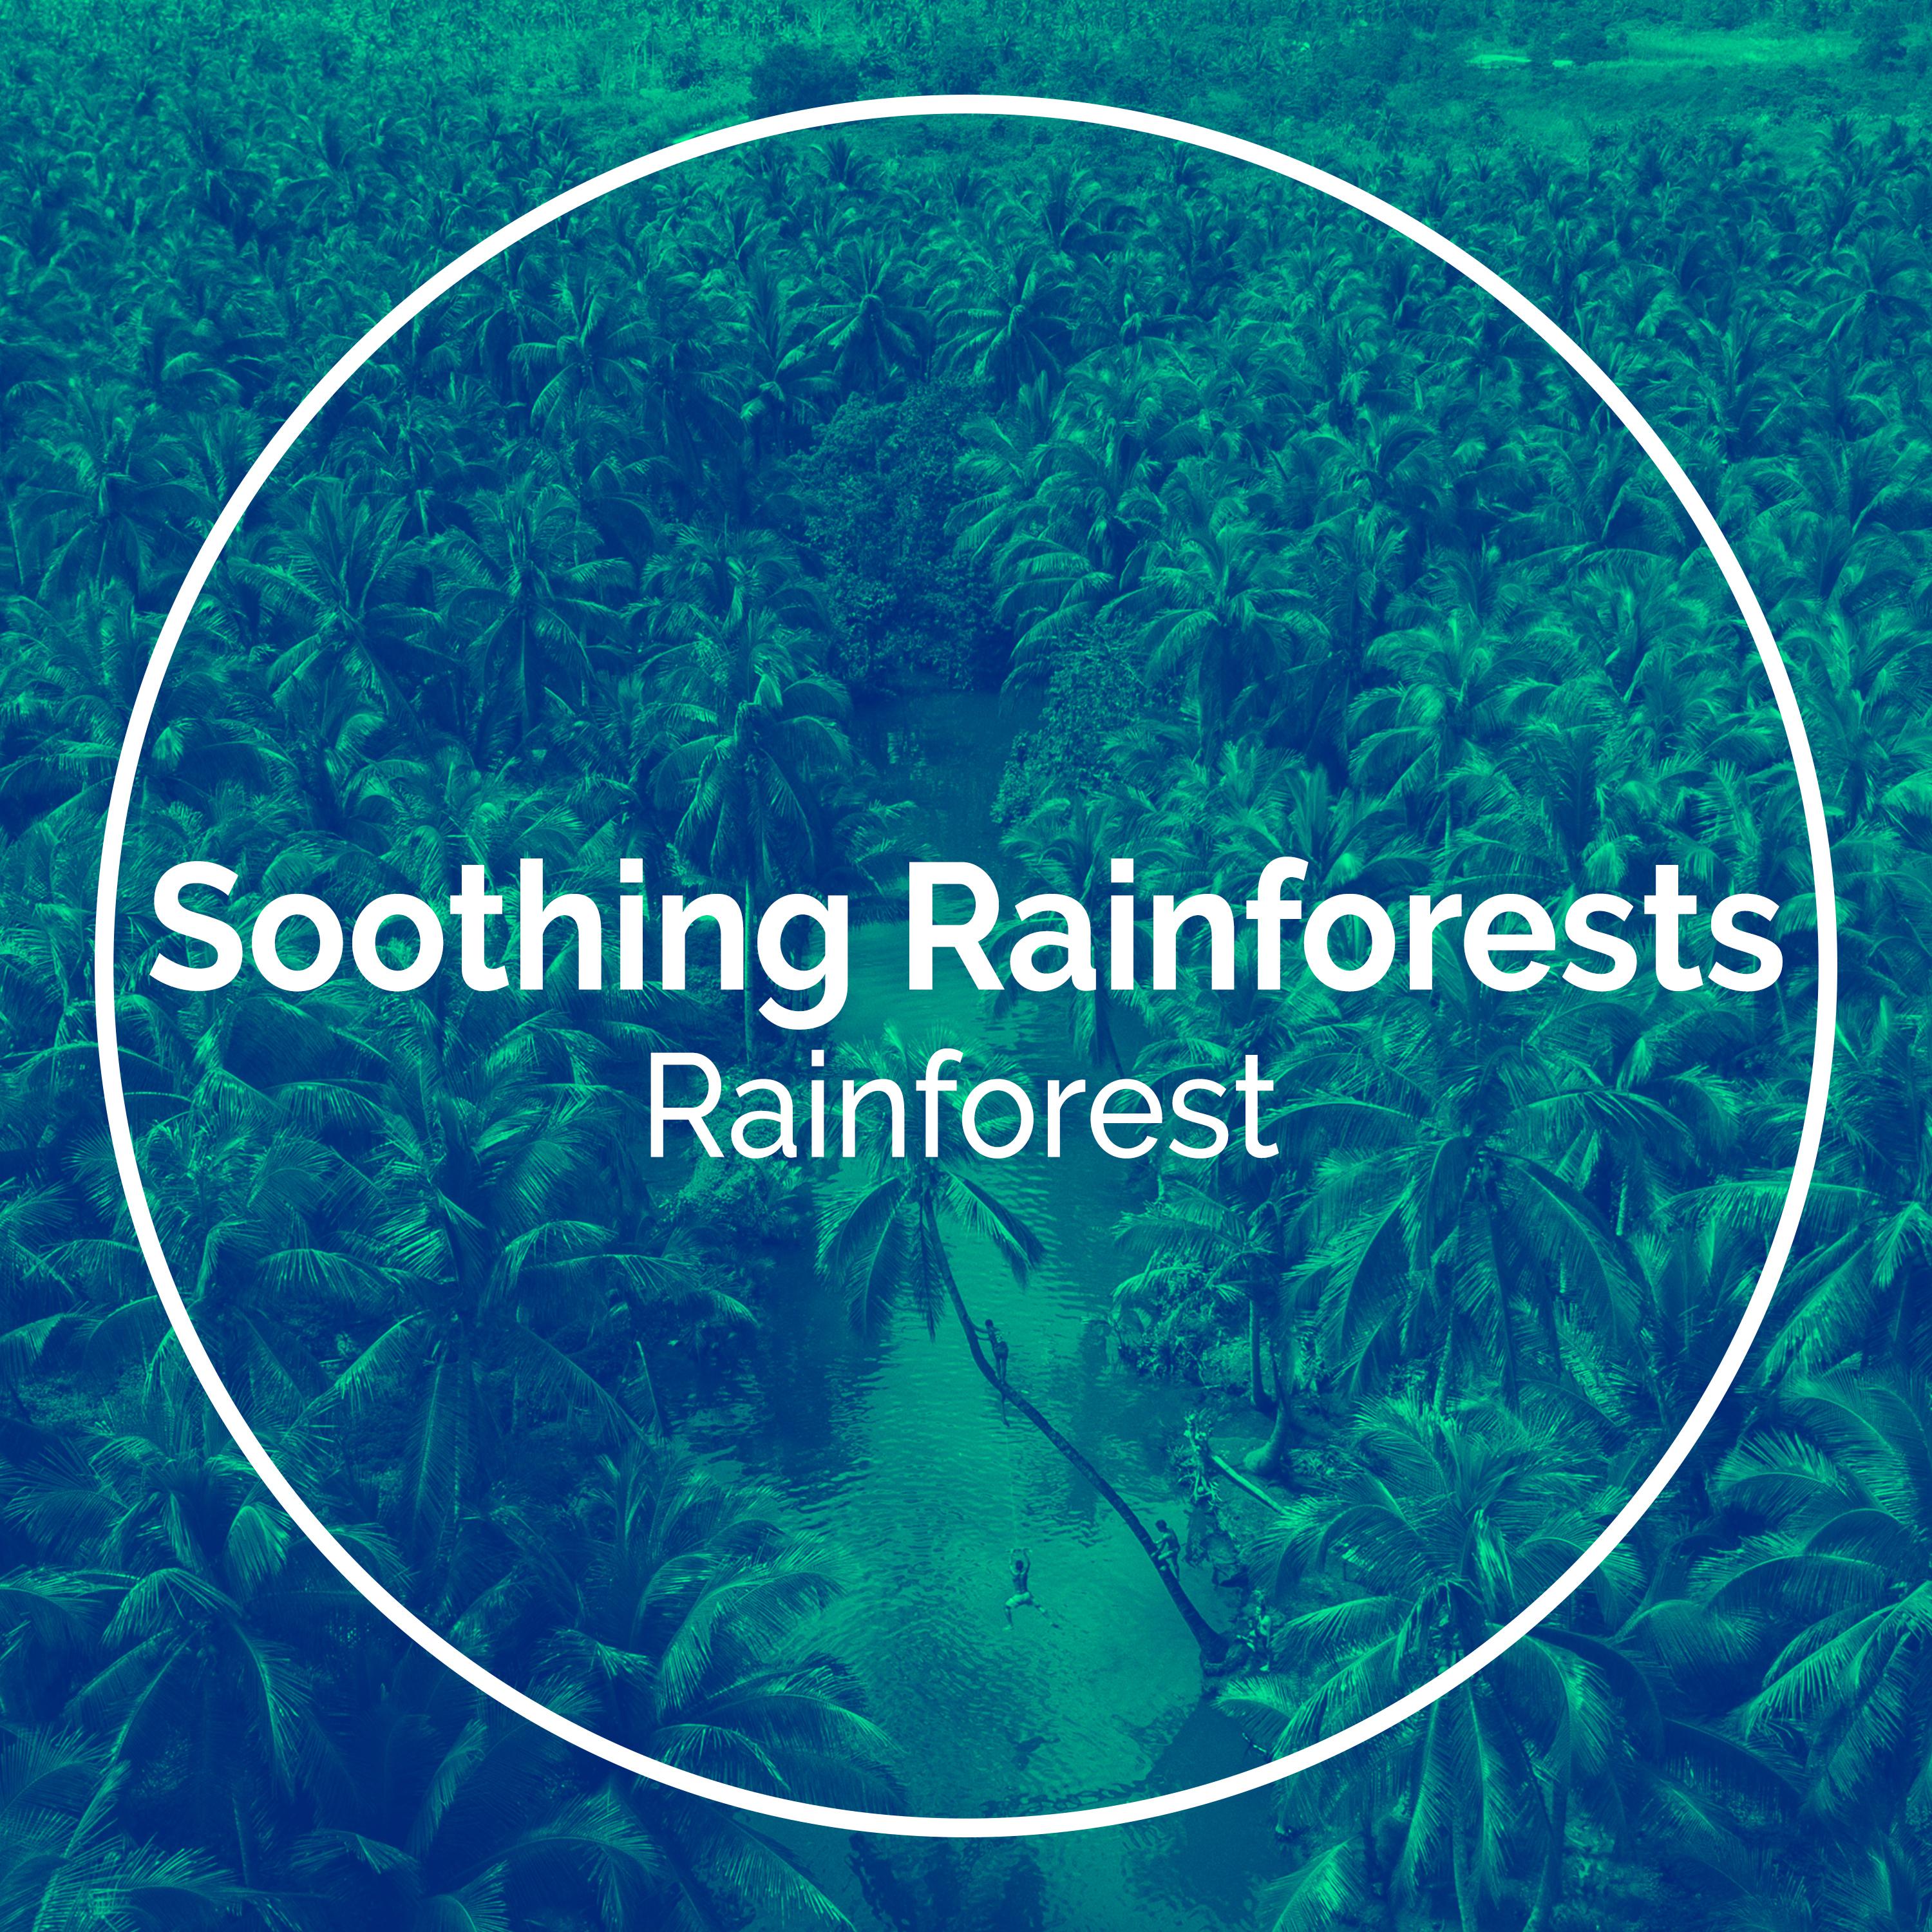 Soothing Rainforests